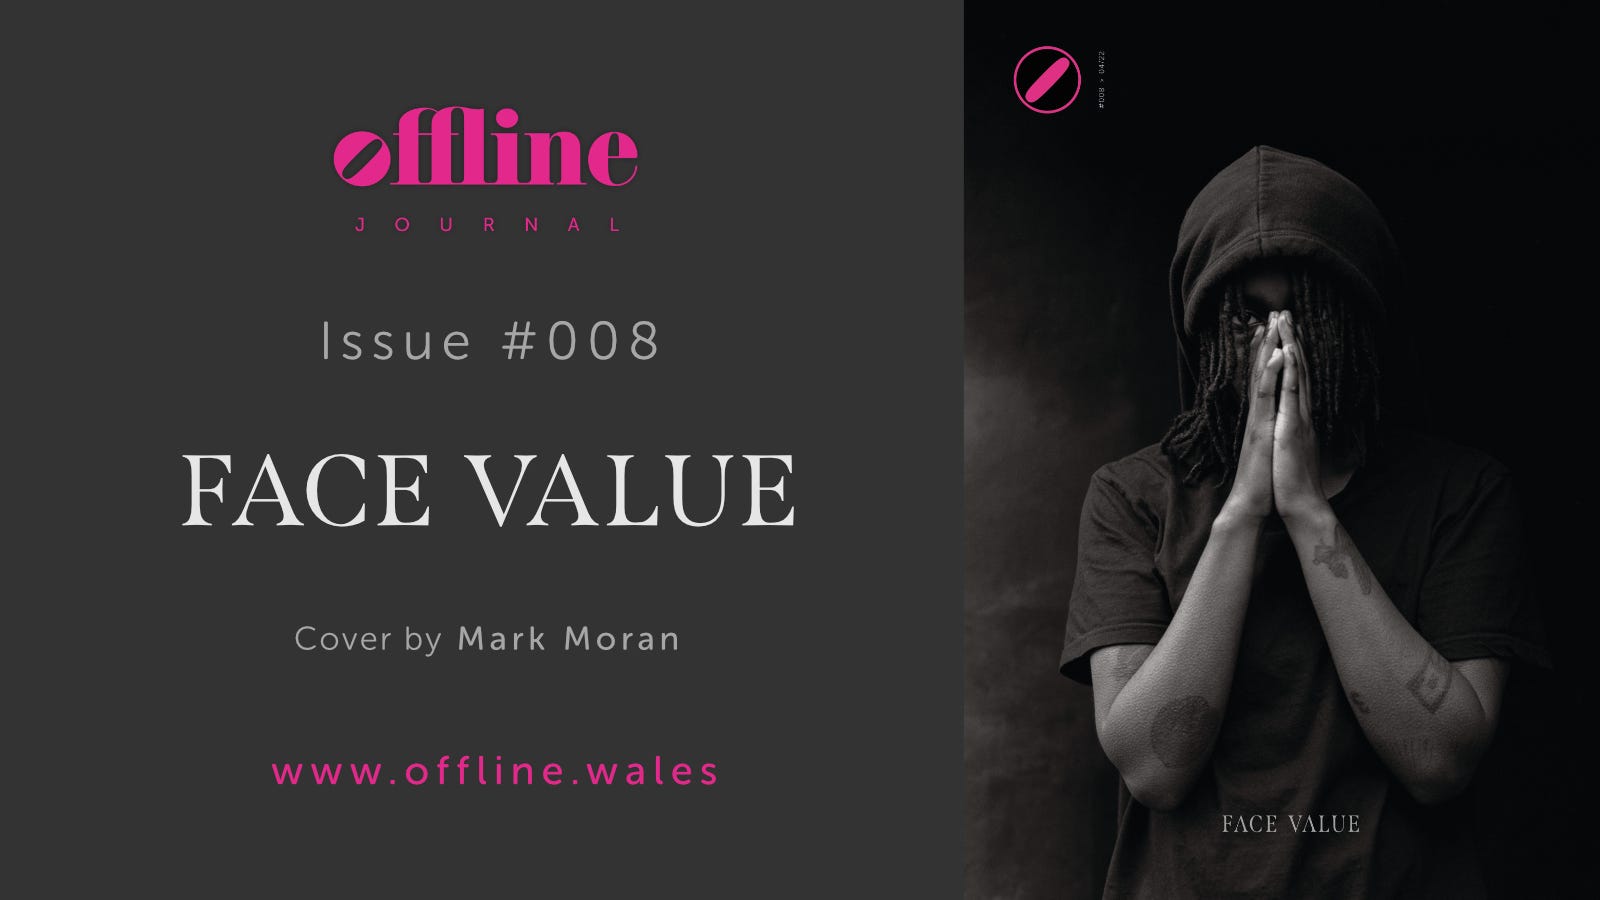 Promo image for Offline Journal issue #008 - FACE VALUE issue on portraiture work being made around Wales. Cover image by Mark Moran